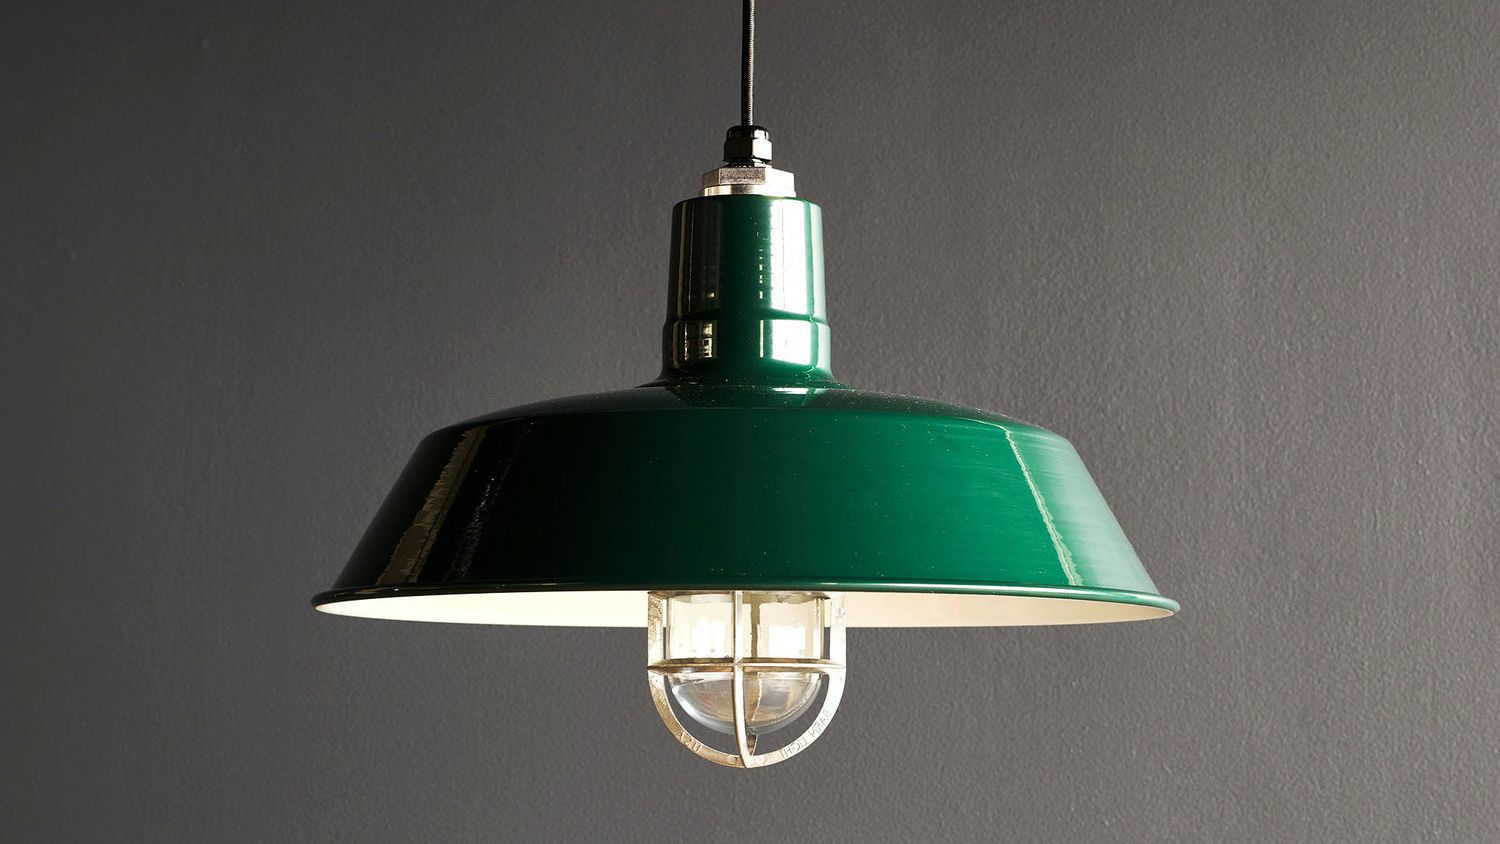 Newest Fall 2019 Sales Are Here! Get This Deal On Levi 1 Light Inside Jayce 1 Light Cylinder Pendants (View 20 of 20)